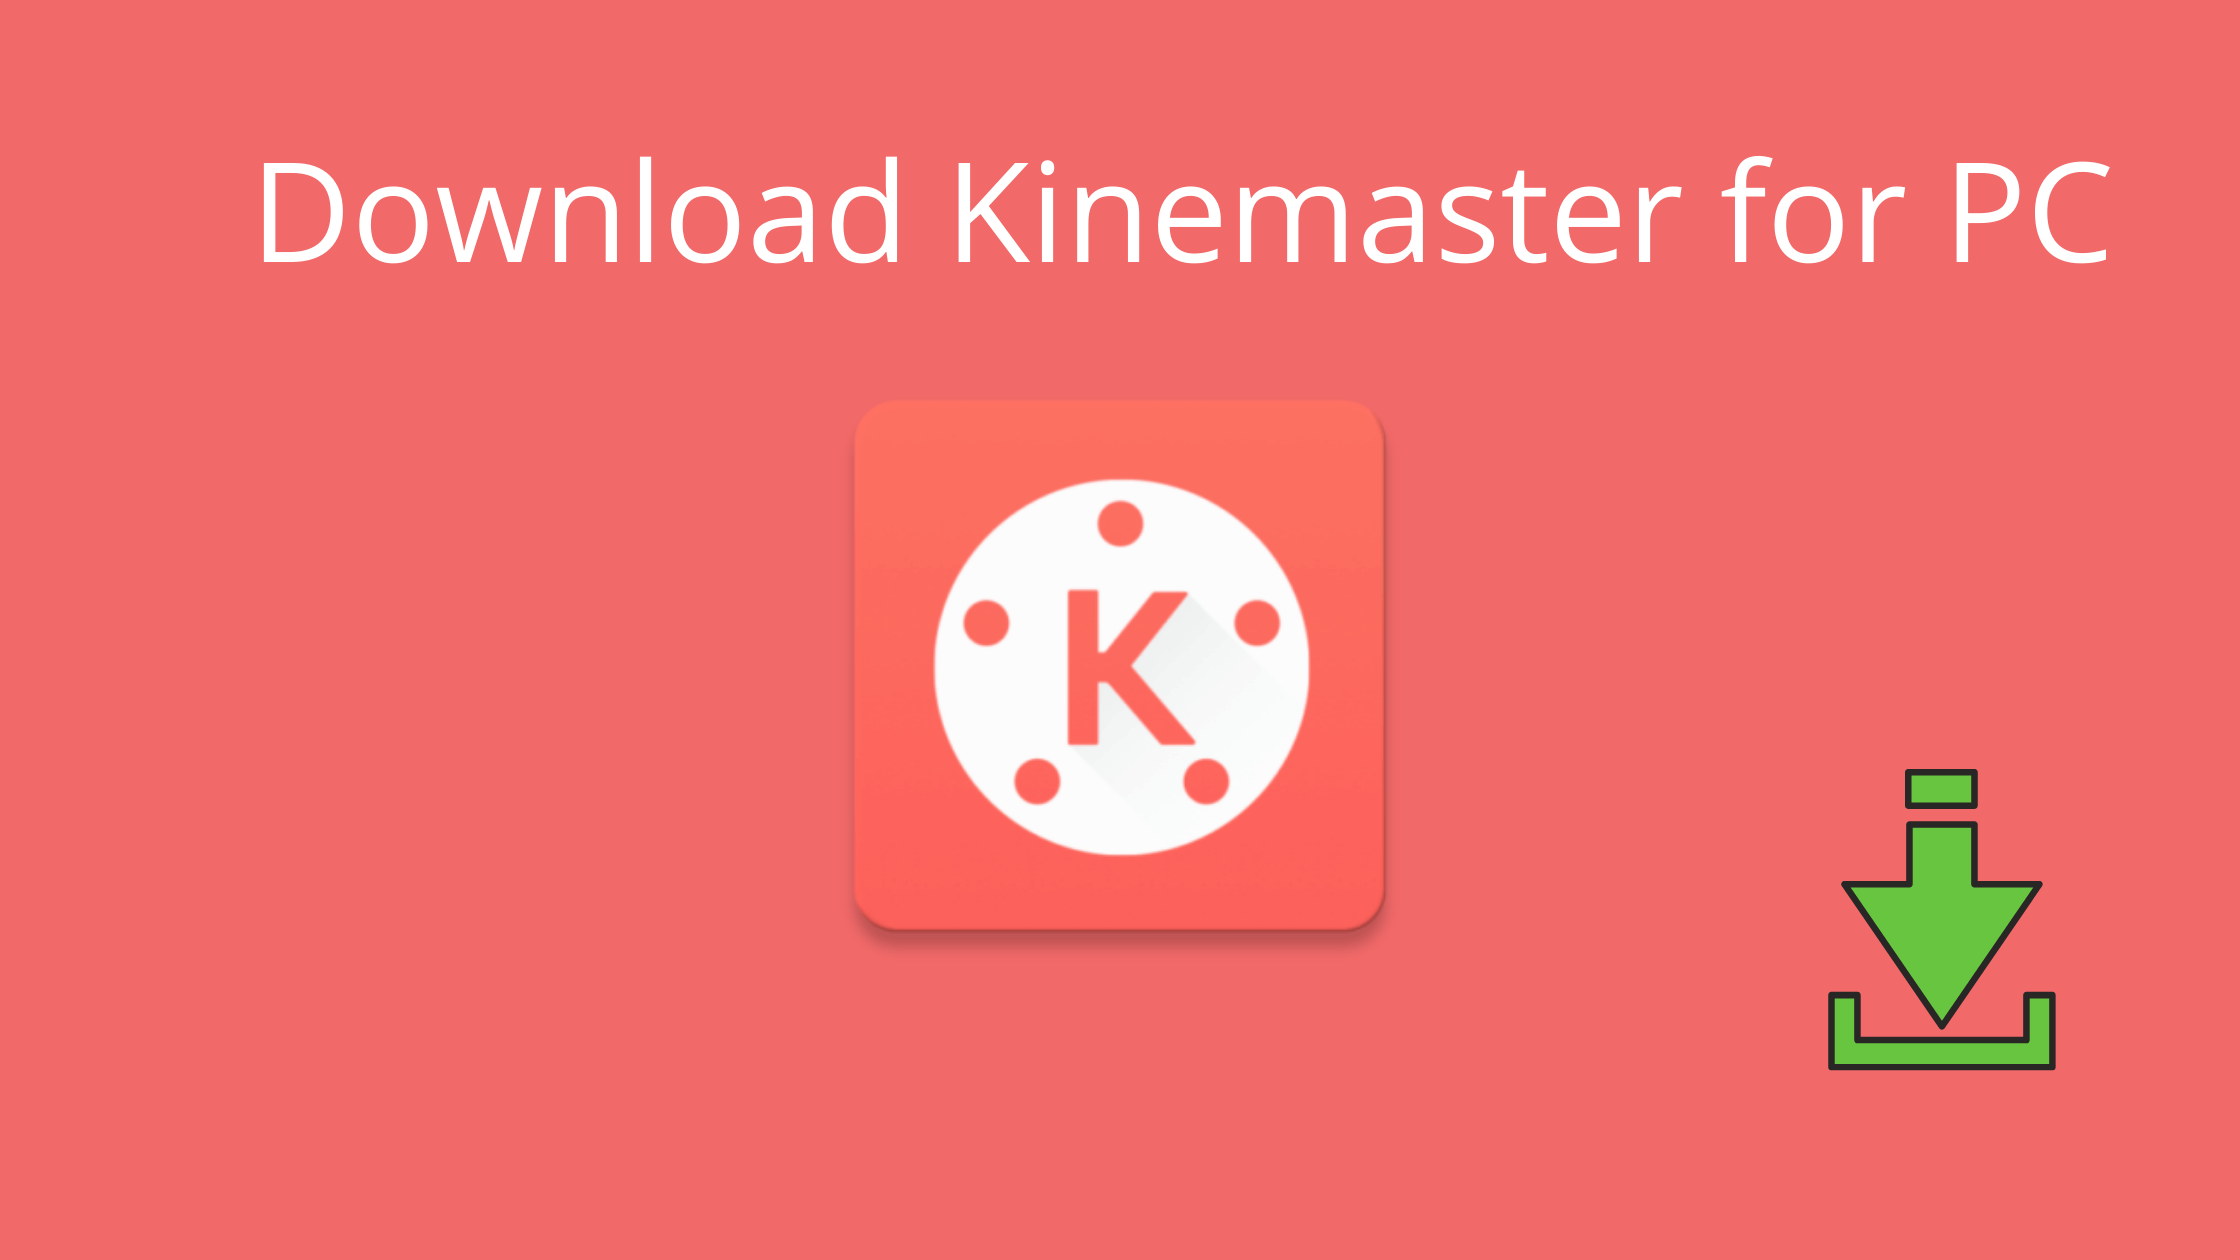 kinemaster for pc window 7 download